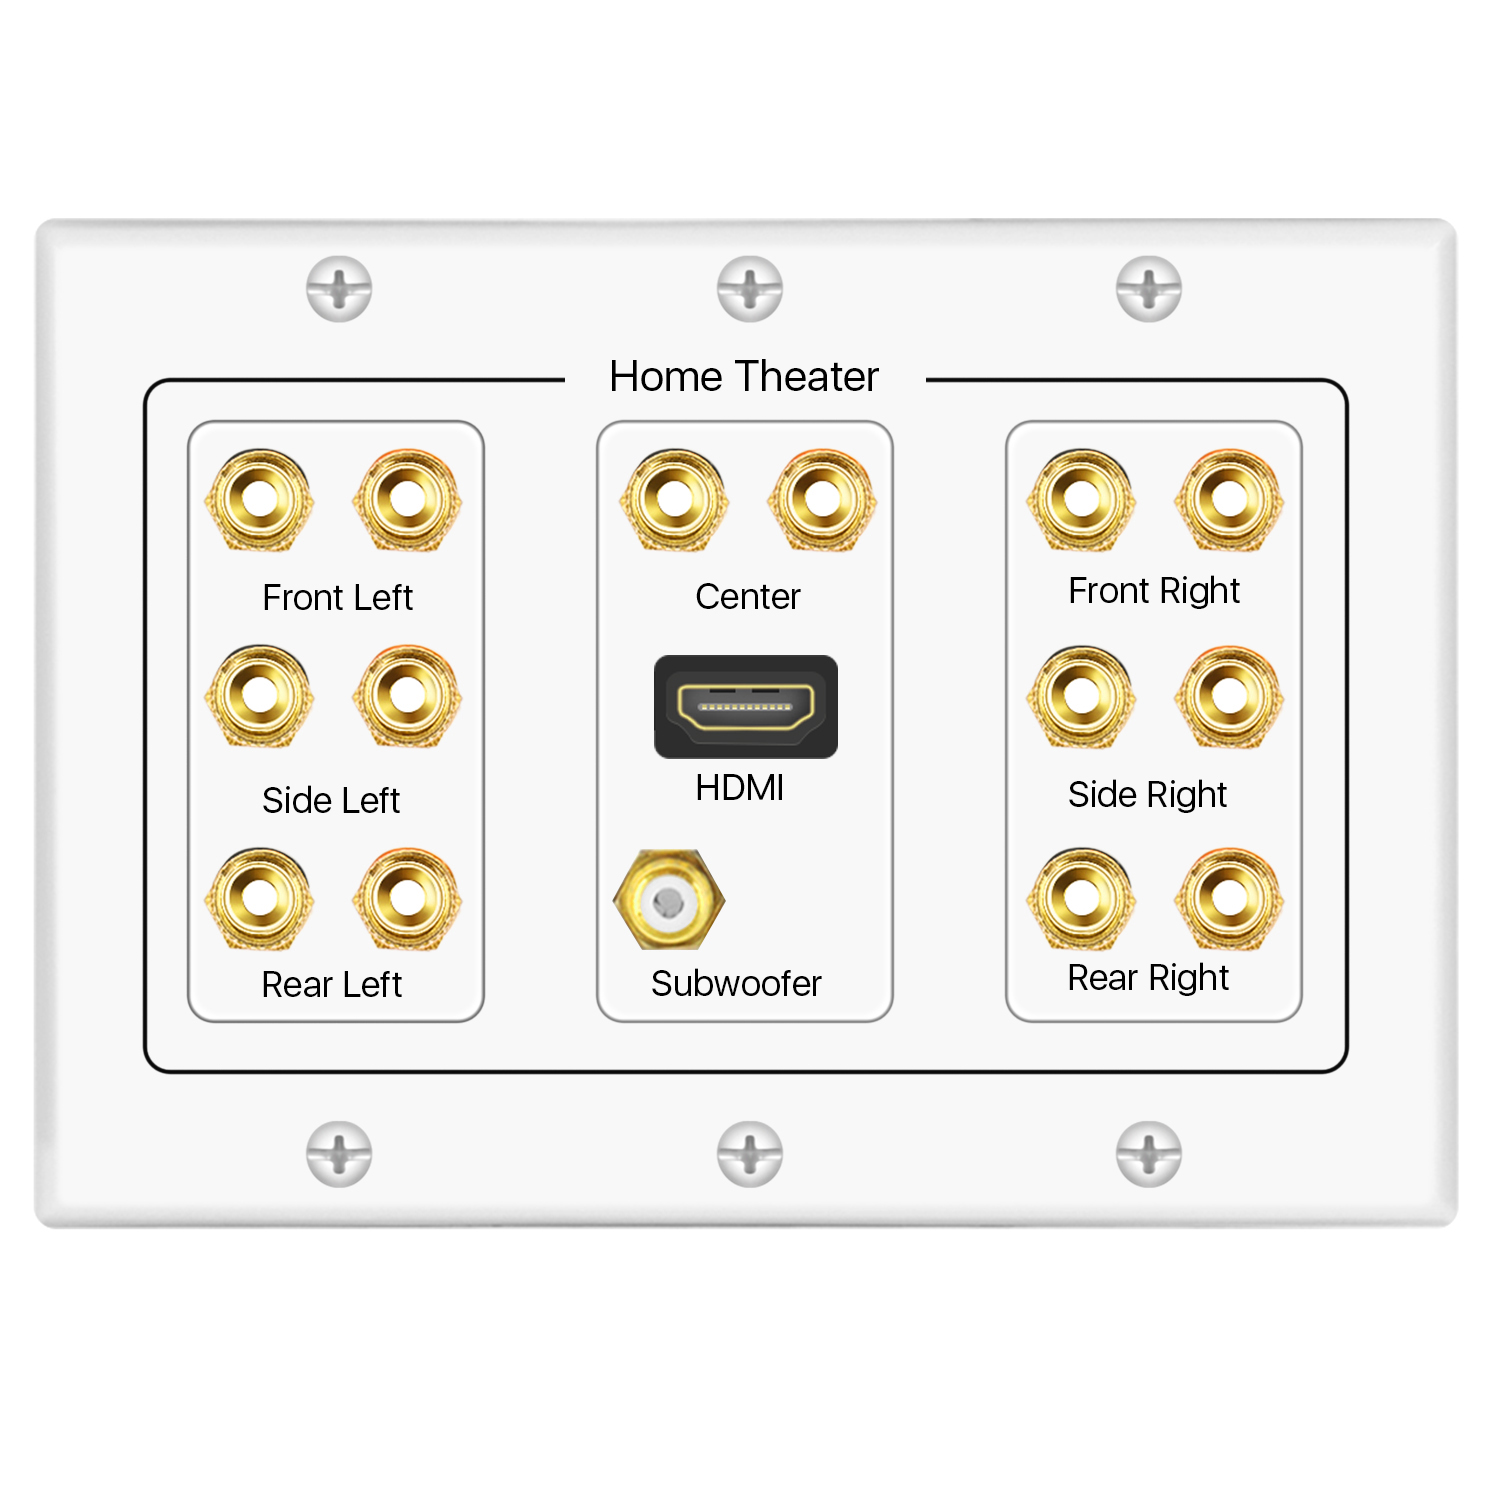 Home Theater Speaker Wall Plate Outlet - 7.1 Surround Sound Audio Distribution Panel, Gold Plated Copper Banana Plug Binding Post Coupler, RCA LFE Jack for Subwoofer, HDMI 4K ARC/eARC Full HD (3-Gang) - image 2 of 5